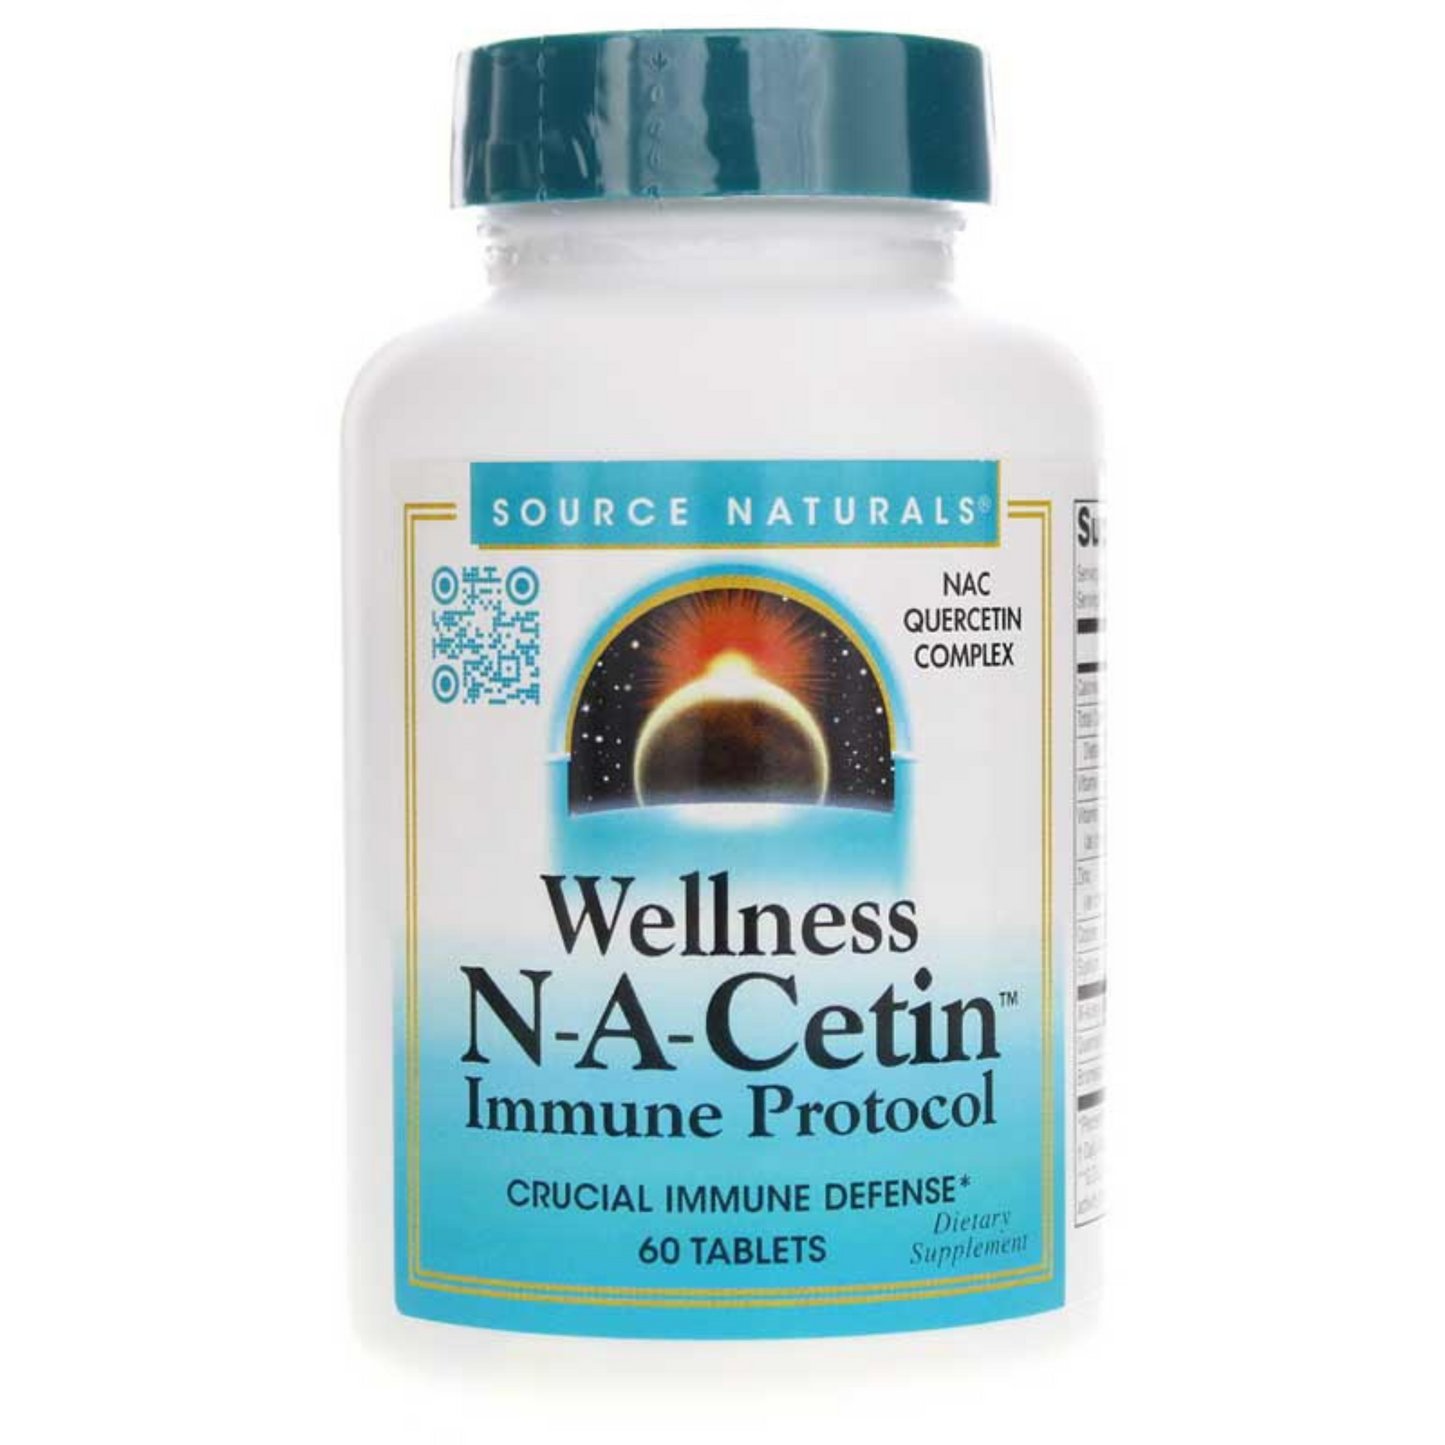 Primary Image of Source Naturals Wellness N-A-Cetin Tablets